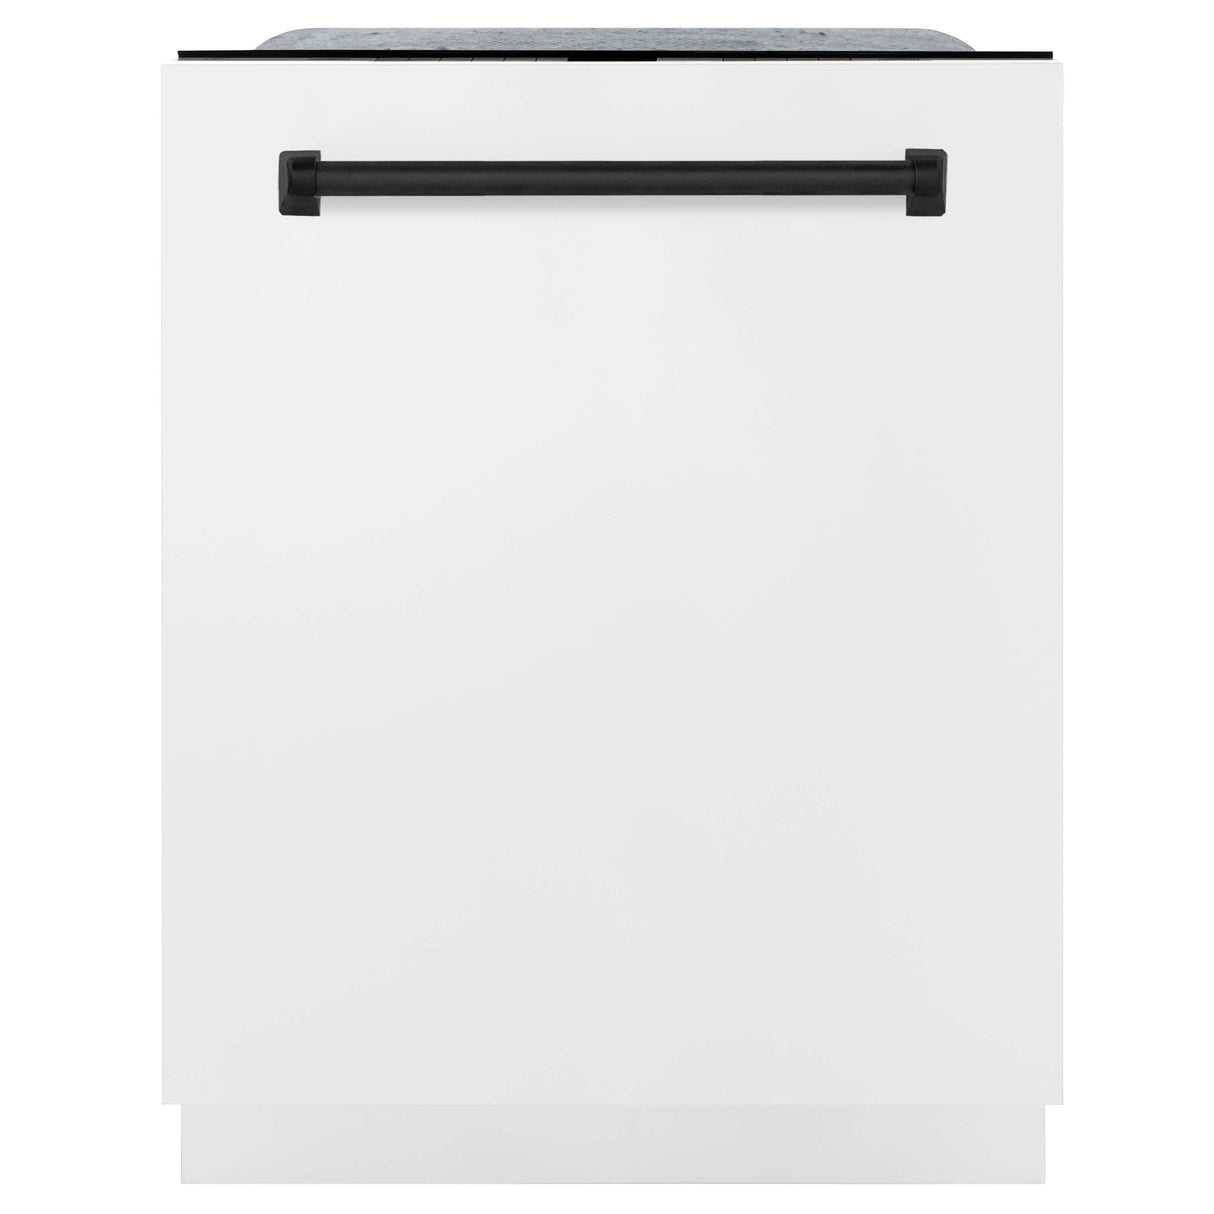 ZLINE Autograph Edition 30 in. Kitchen Package with Stainless Steel Dual Fuel Range with White Matte Door, Range Hood and Dishwasher with Matte Black Accents (3AKP-RAWMRHDWM30-MB)